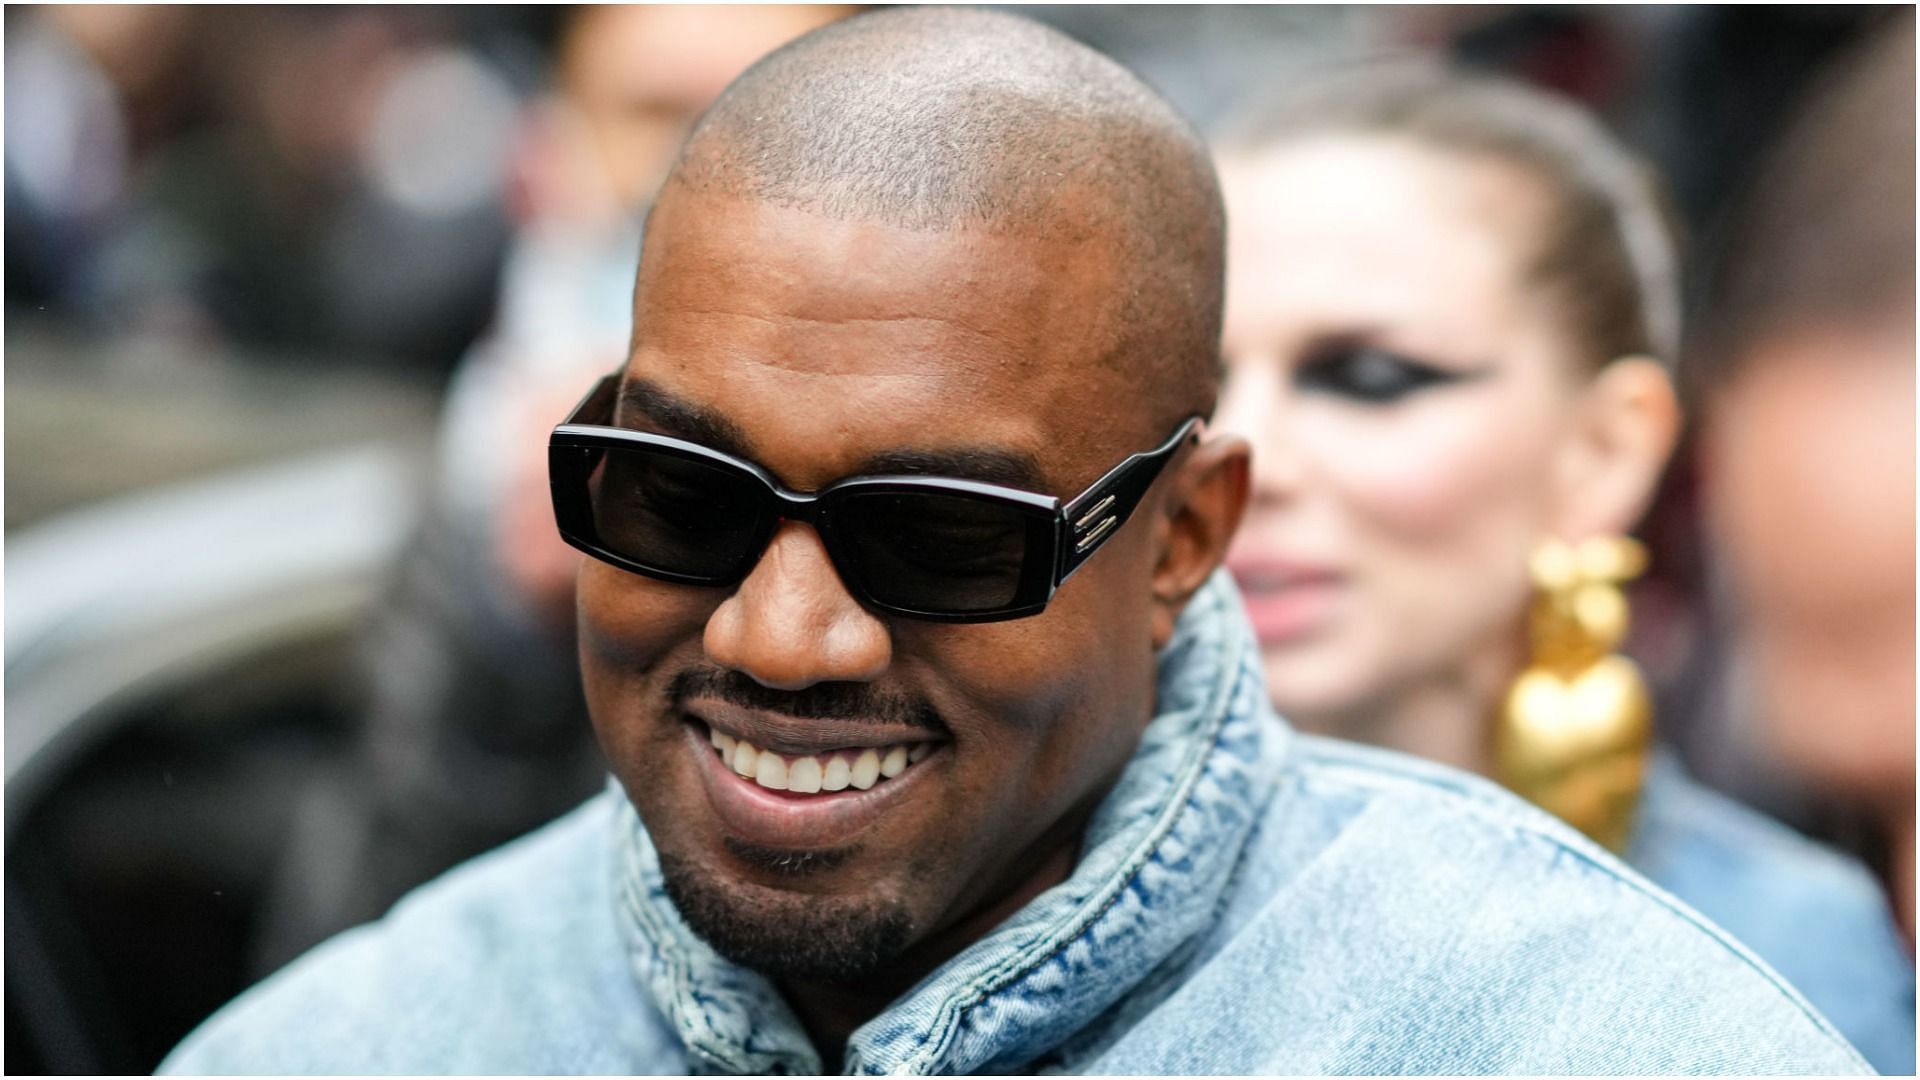 Kanye West has been warned by Australian PM to get vaccinated before performing (Image via Edward Berthelot/Getty Images)